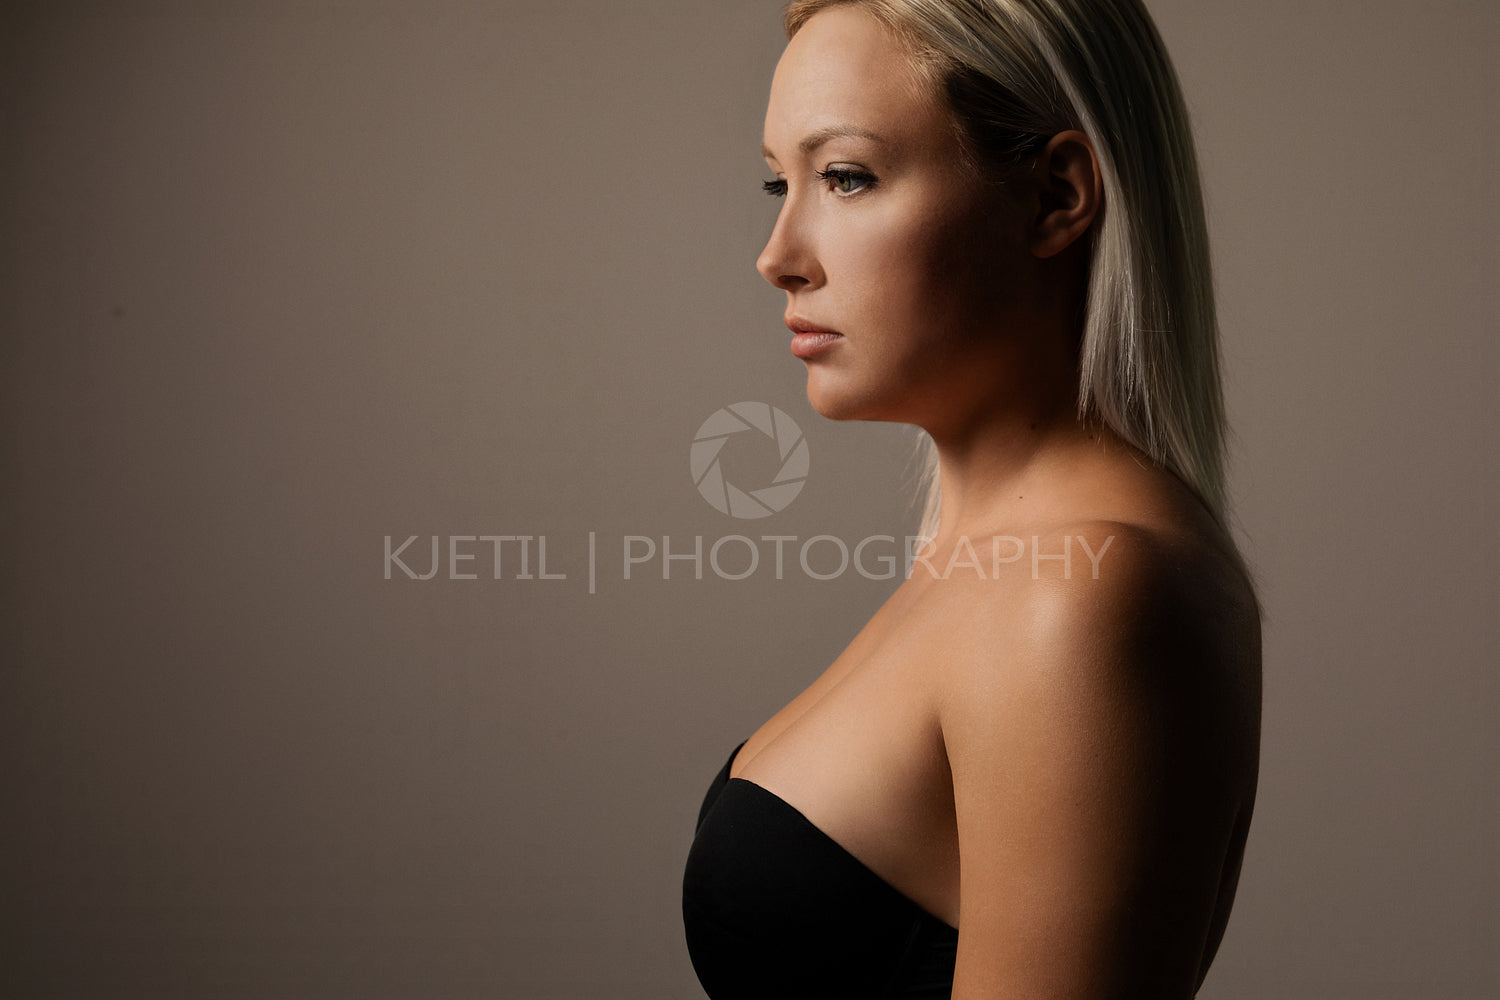 Dark studio portrait of gorgeous natural woman with blonde hair on brown background